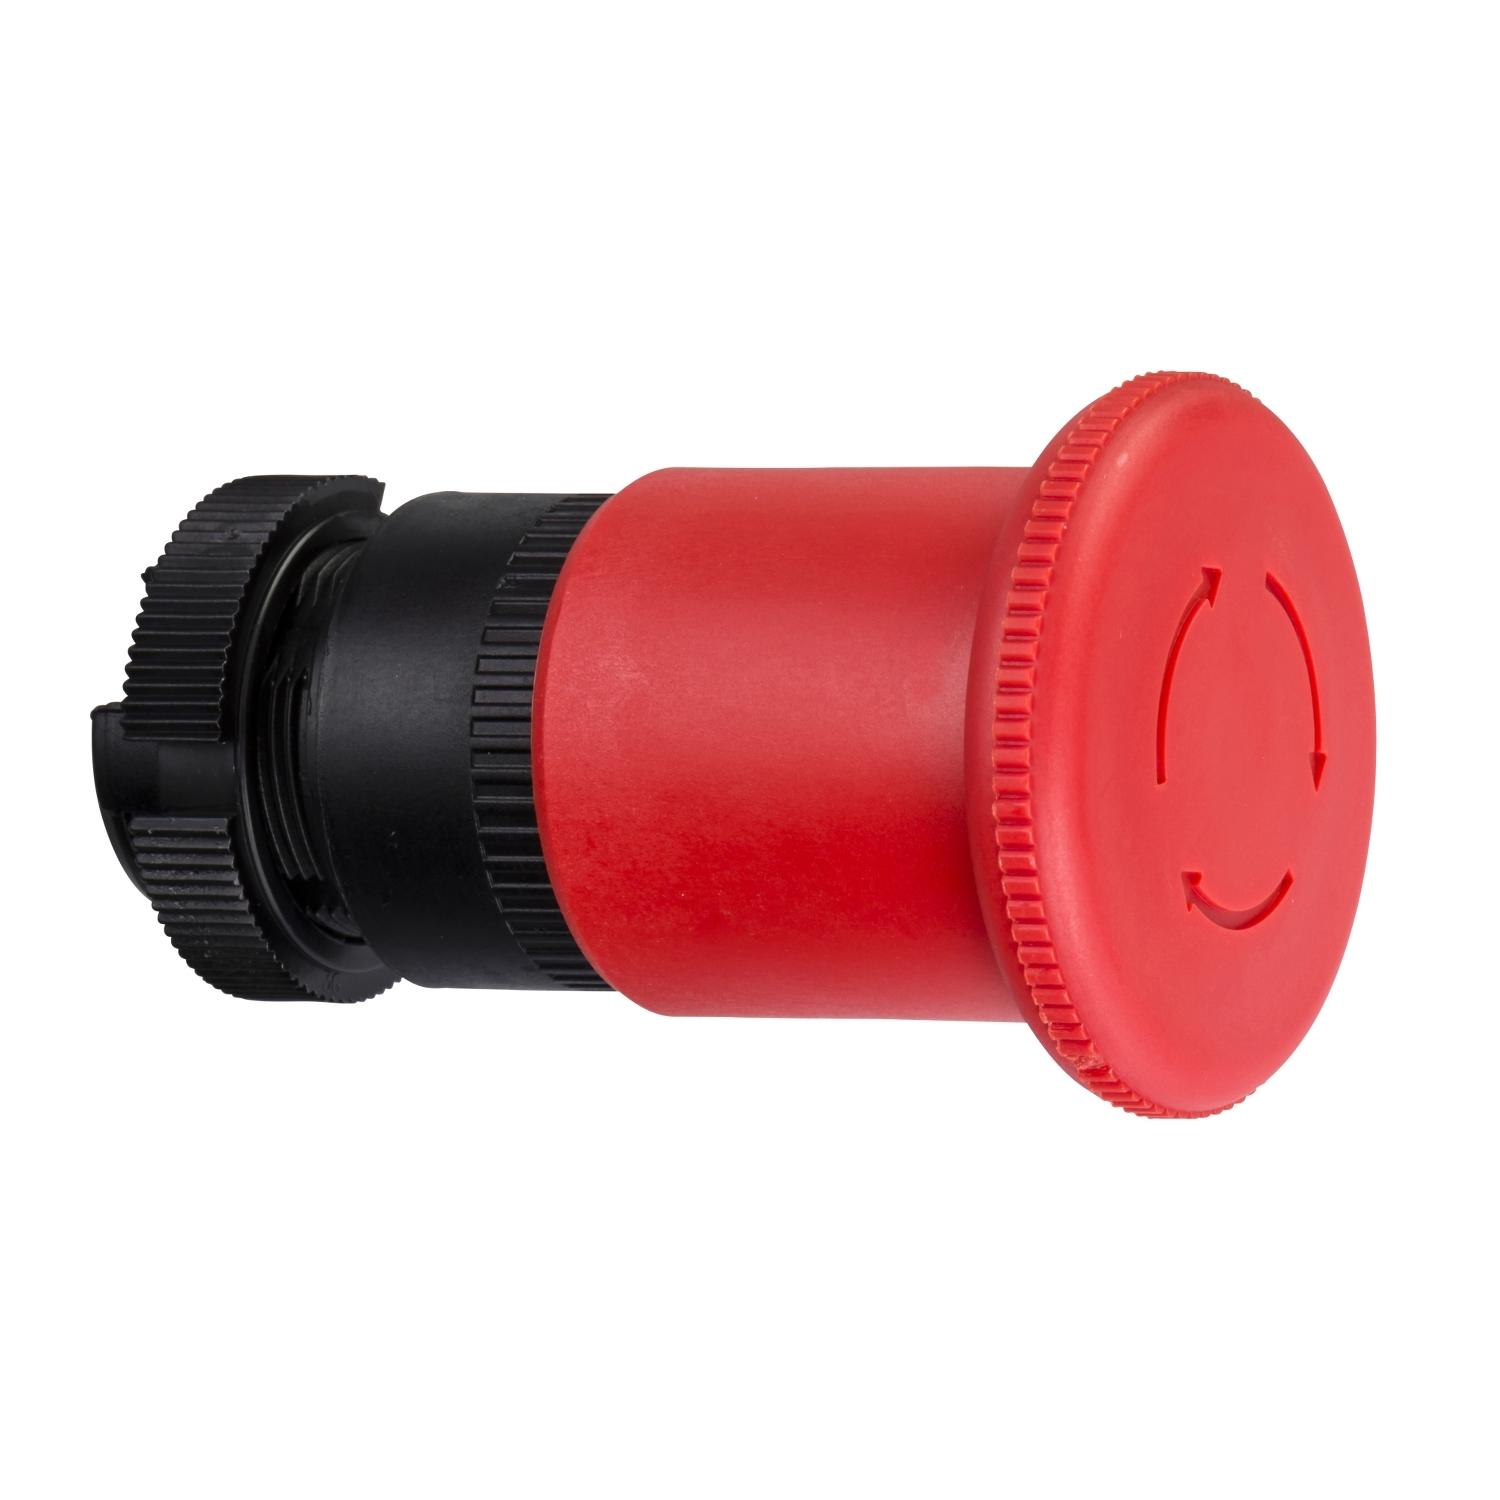 Head for emergency switching off push button, Harmony XAC, red mushroom 40mm, latching turn to release, unmarked